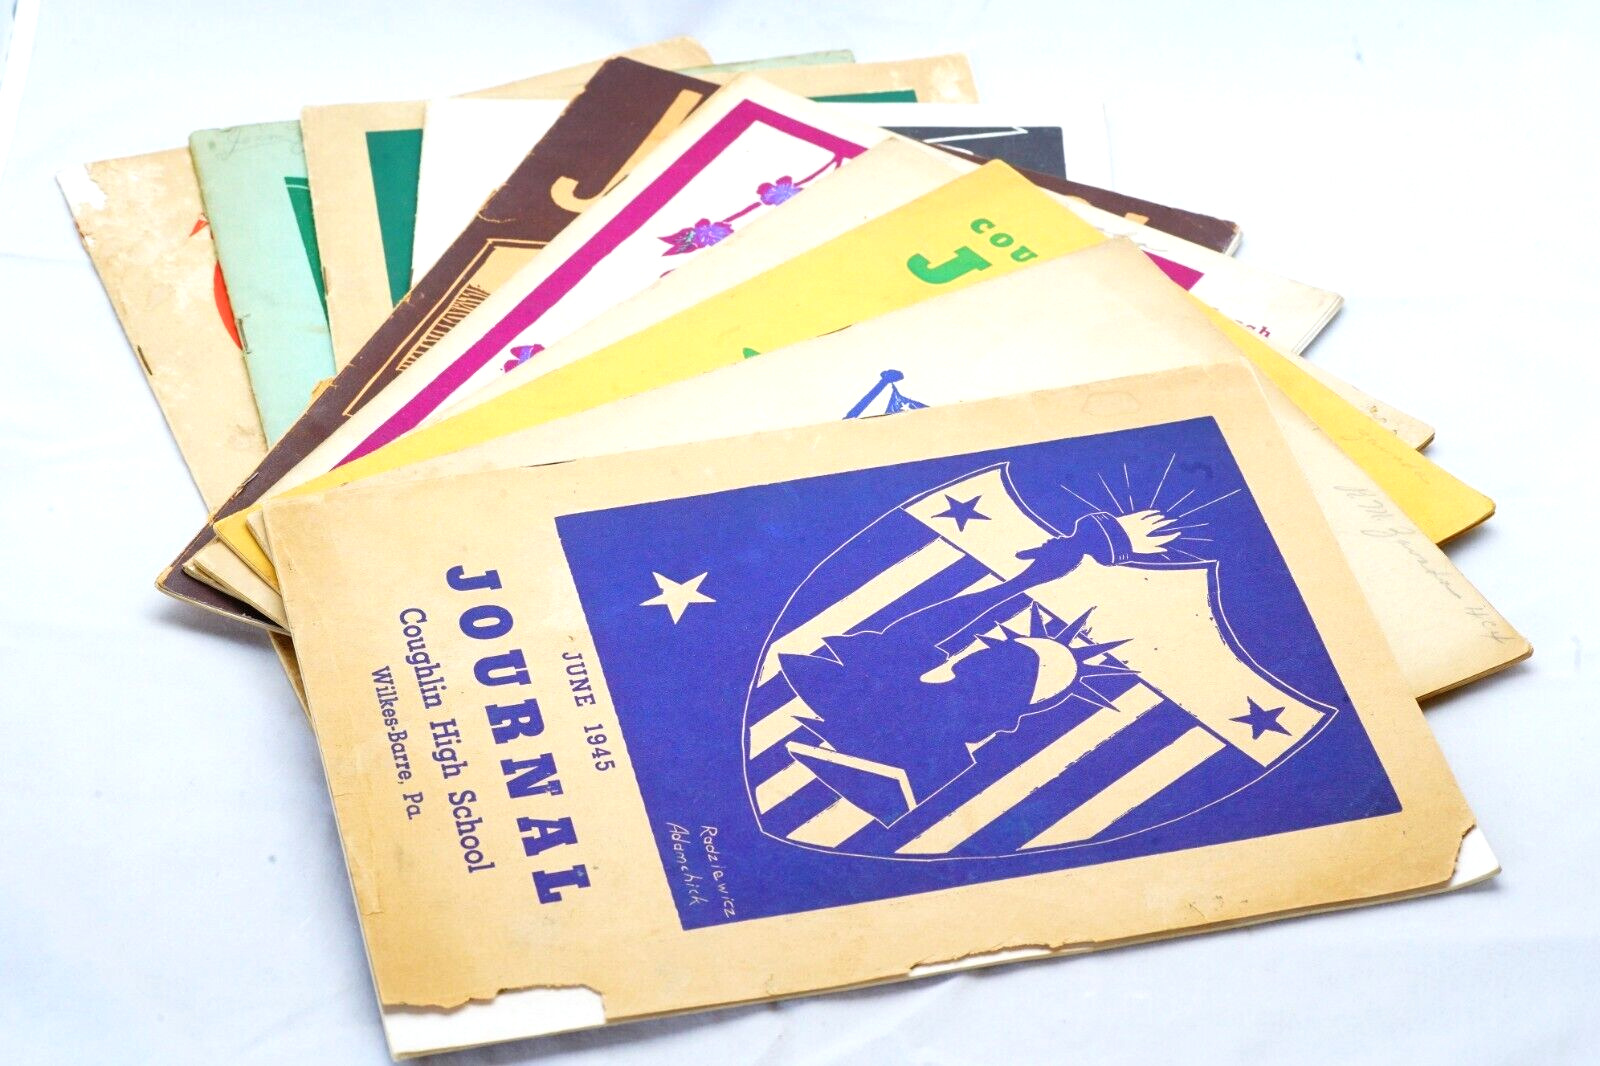 Lot 10 Wilkes-Barre PA 1940-50s COUGHLIN HIGH SCHOOL JOURNALS